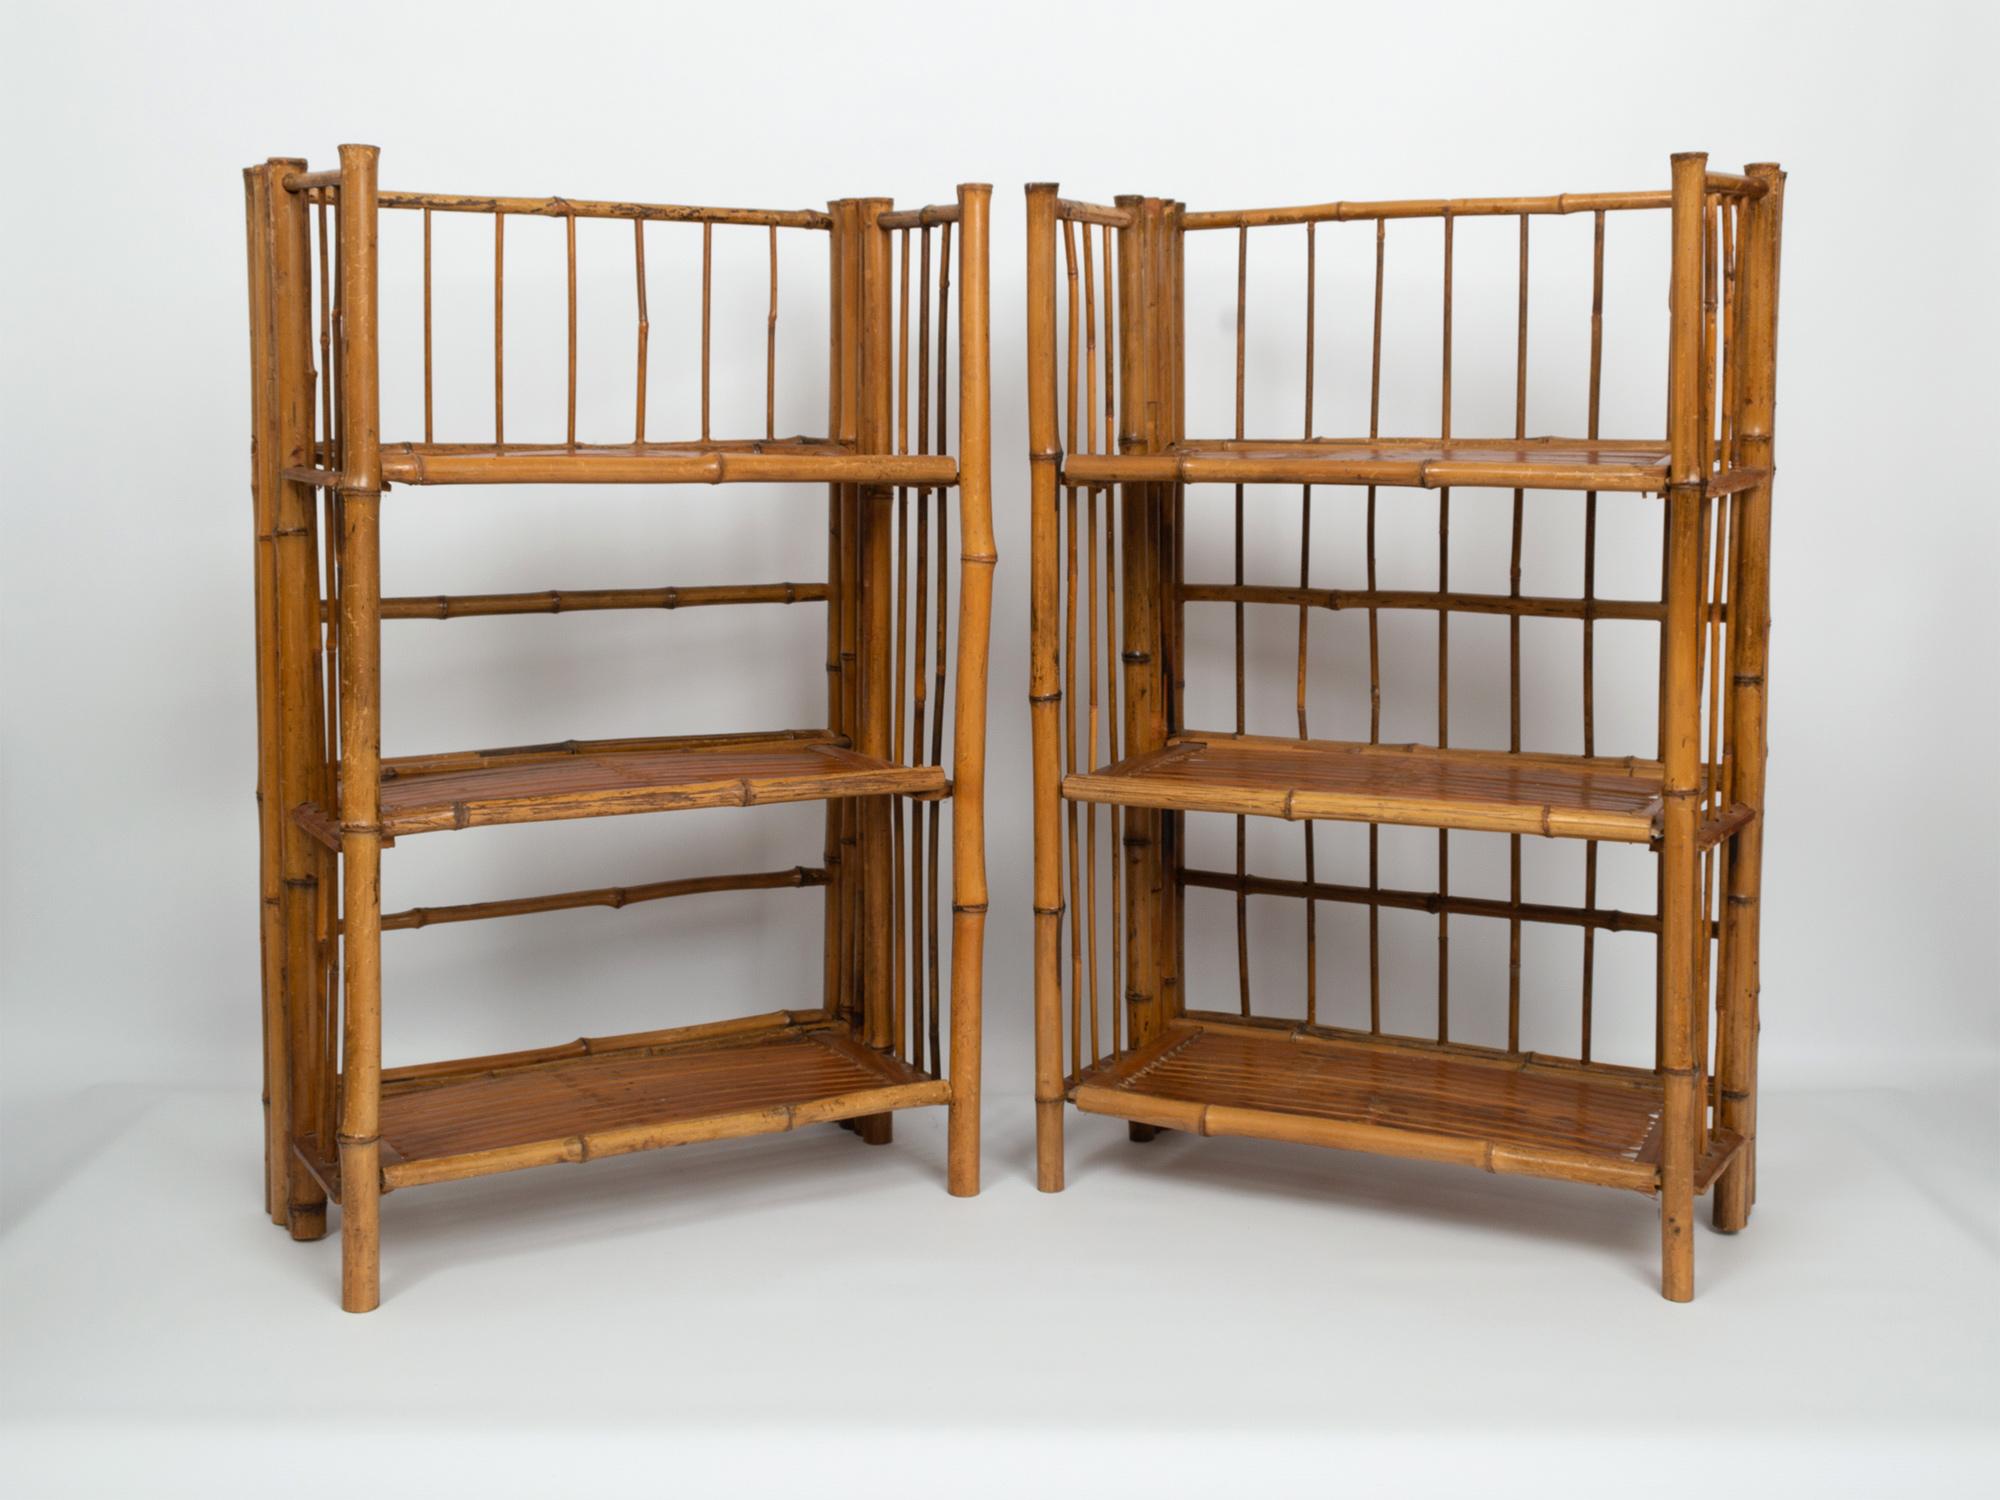 Pair of early 20th Century bamboo folding étagères campaign shelves. Three shelves can be folded into various configurations as needed or can be folded entirely flat for neat storage.

Very good condition